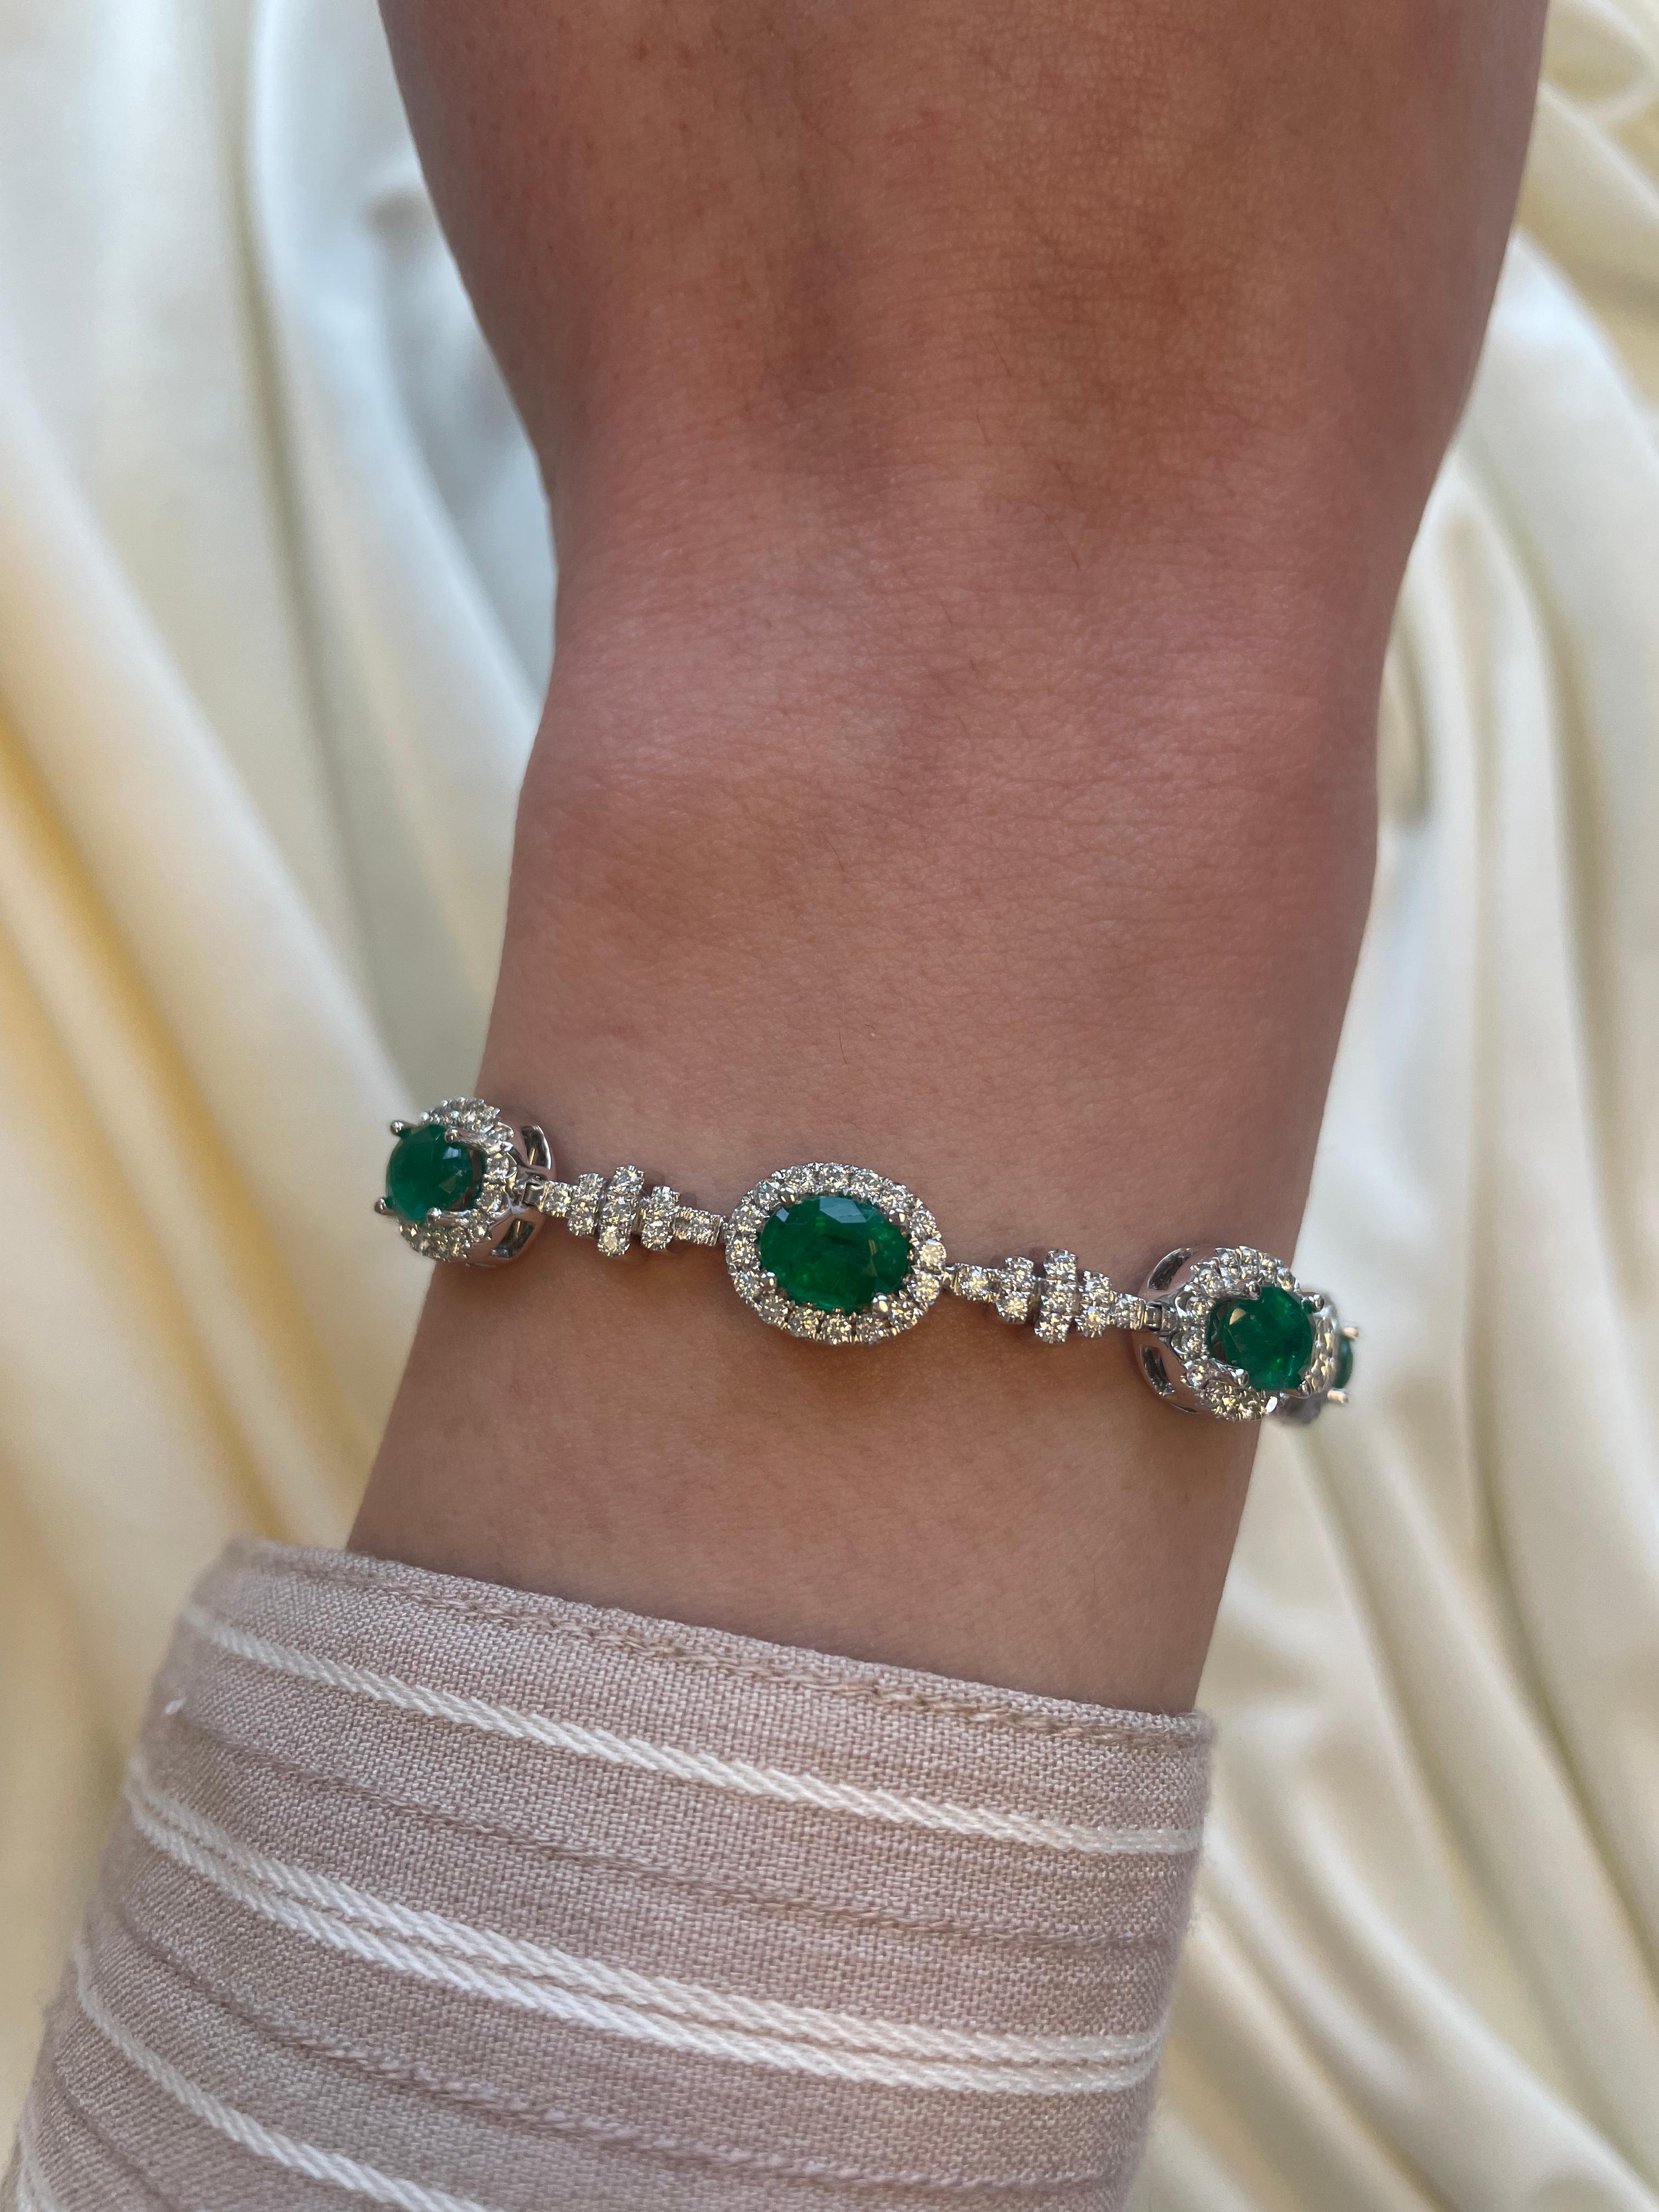 Exquisite and elegant emerald and diamond bracelet.
13.22 carats total gemstone weight.
9 oval cut emeralds, approximately F2, 6.57 carats. Complimented by 224 round brilliant diamonds, 2.51 carats. Approximately G/H color and SI clarity. 18k white